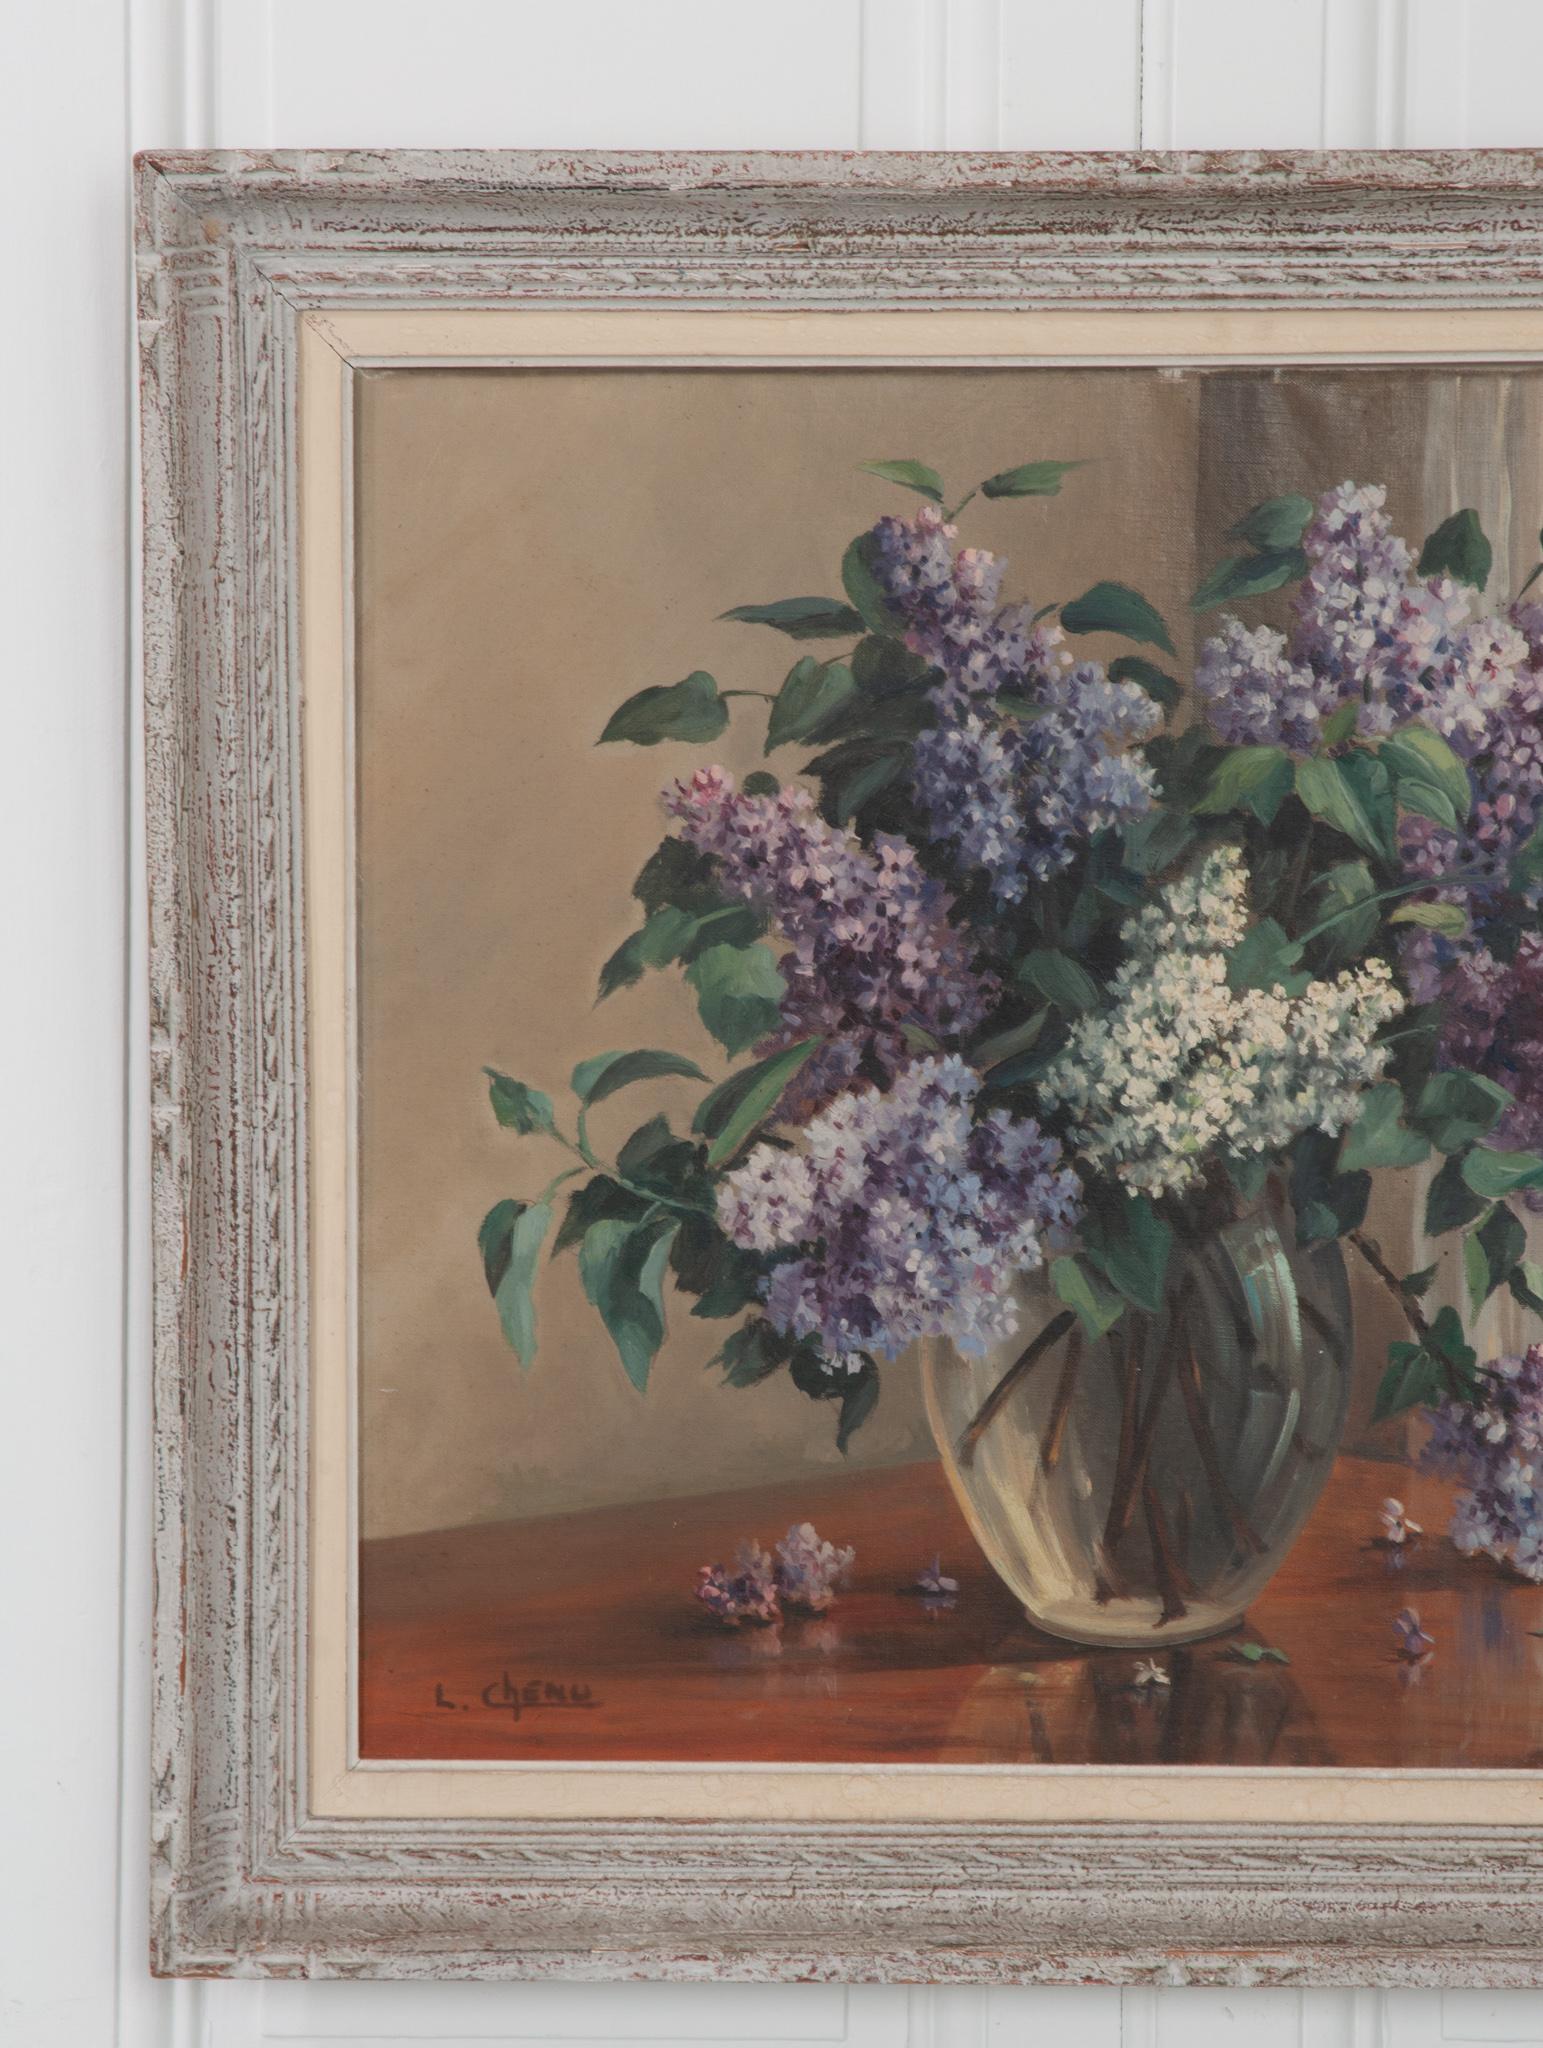 Painted Lilacs by Lucien Chenu